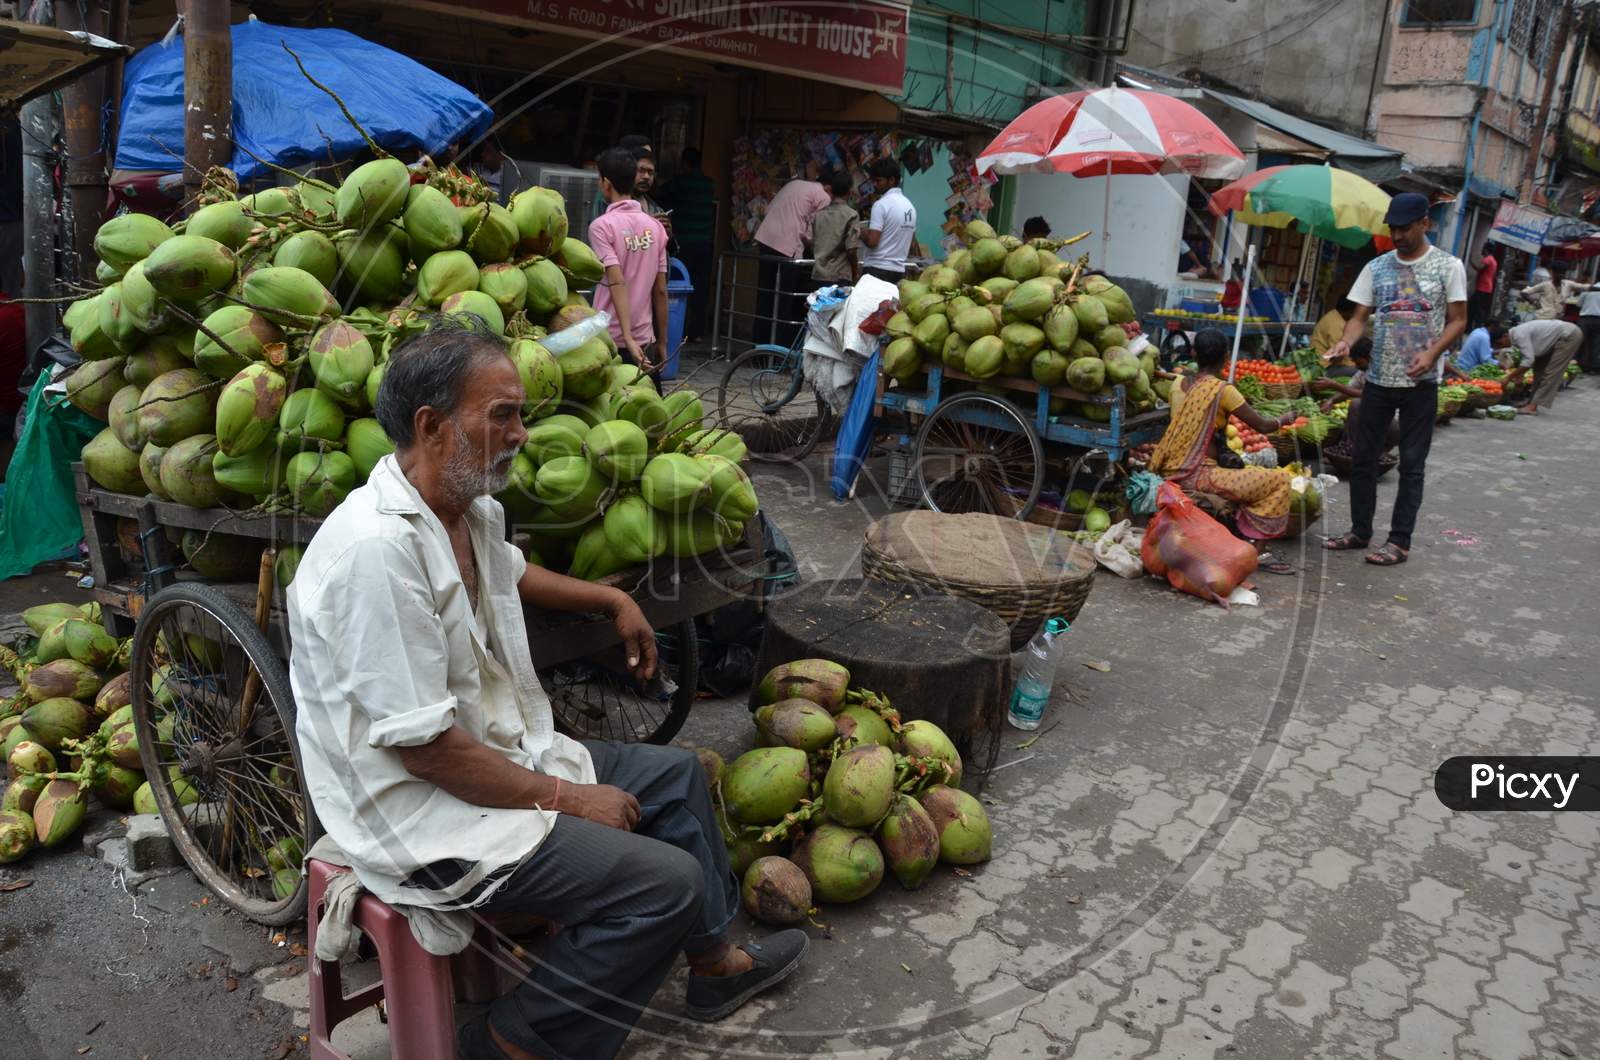 An Old Man Selling Coconuts in Guwahati, Assam